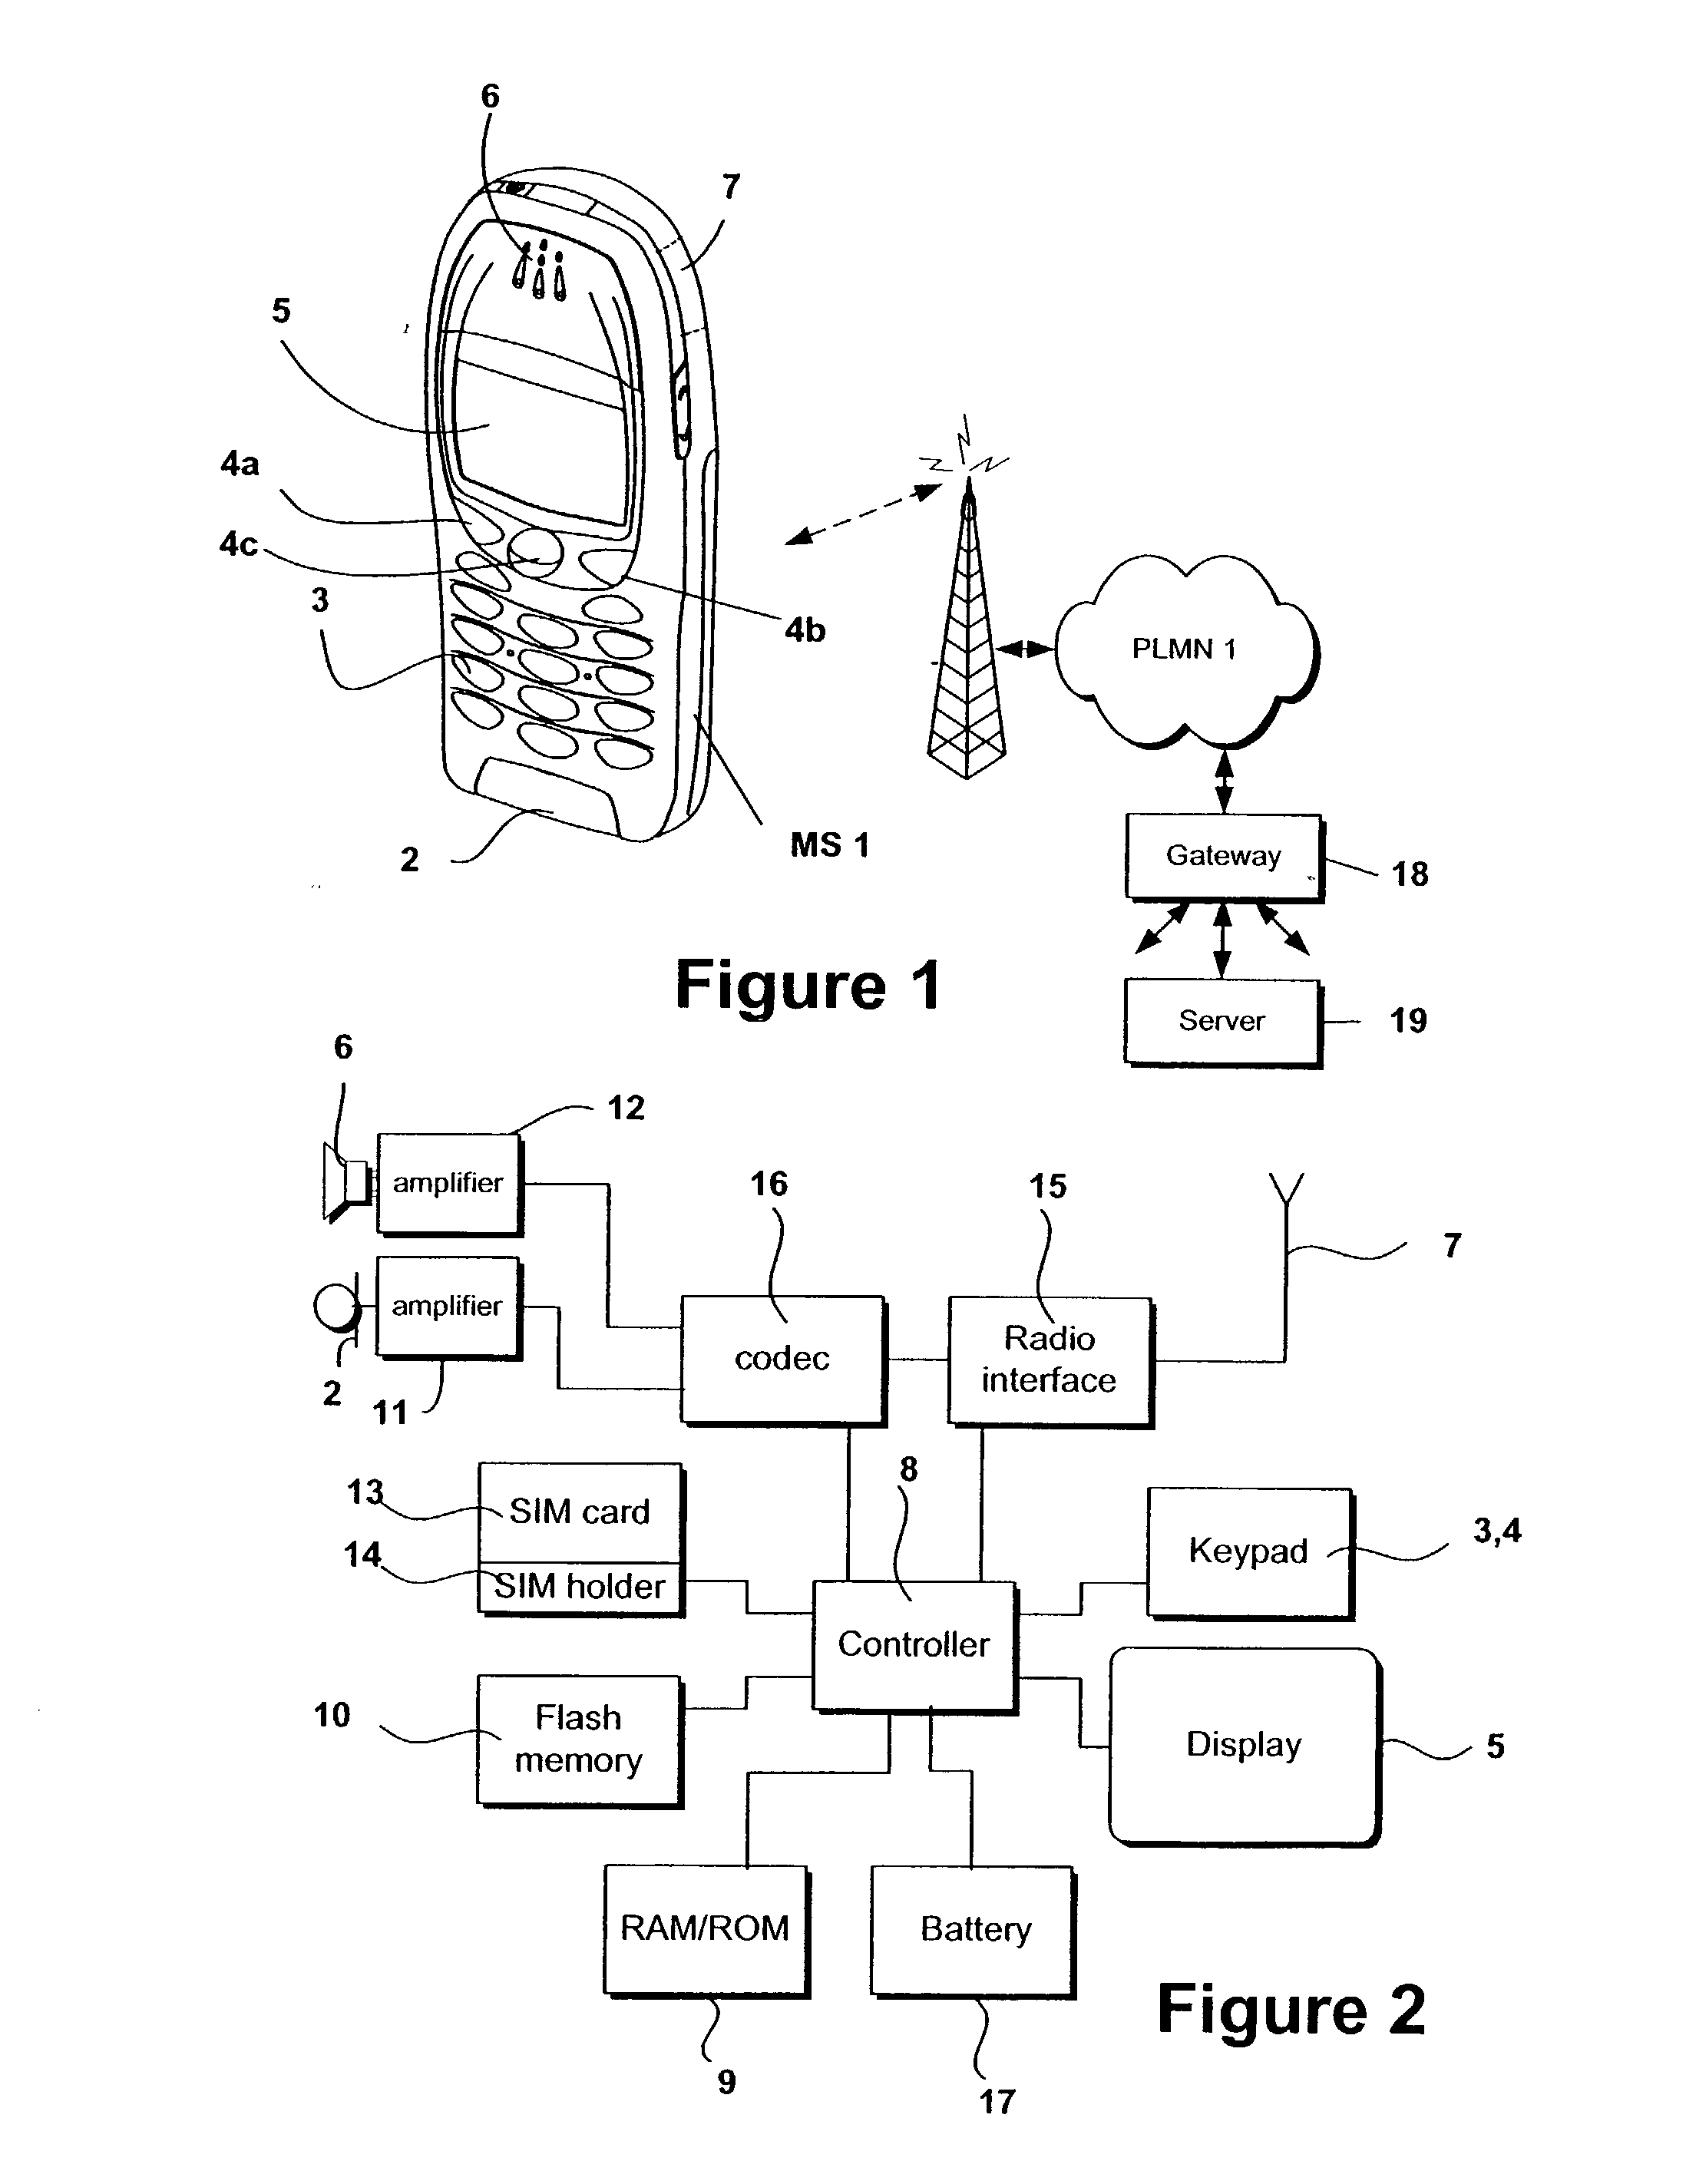 System and method for providing context sensitive recommendations to digital services